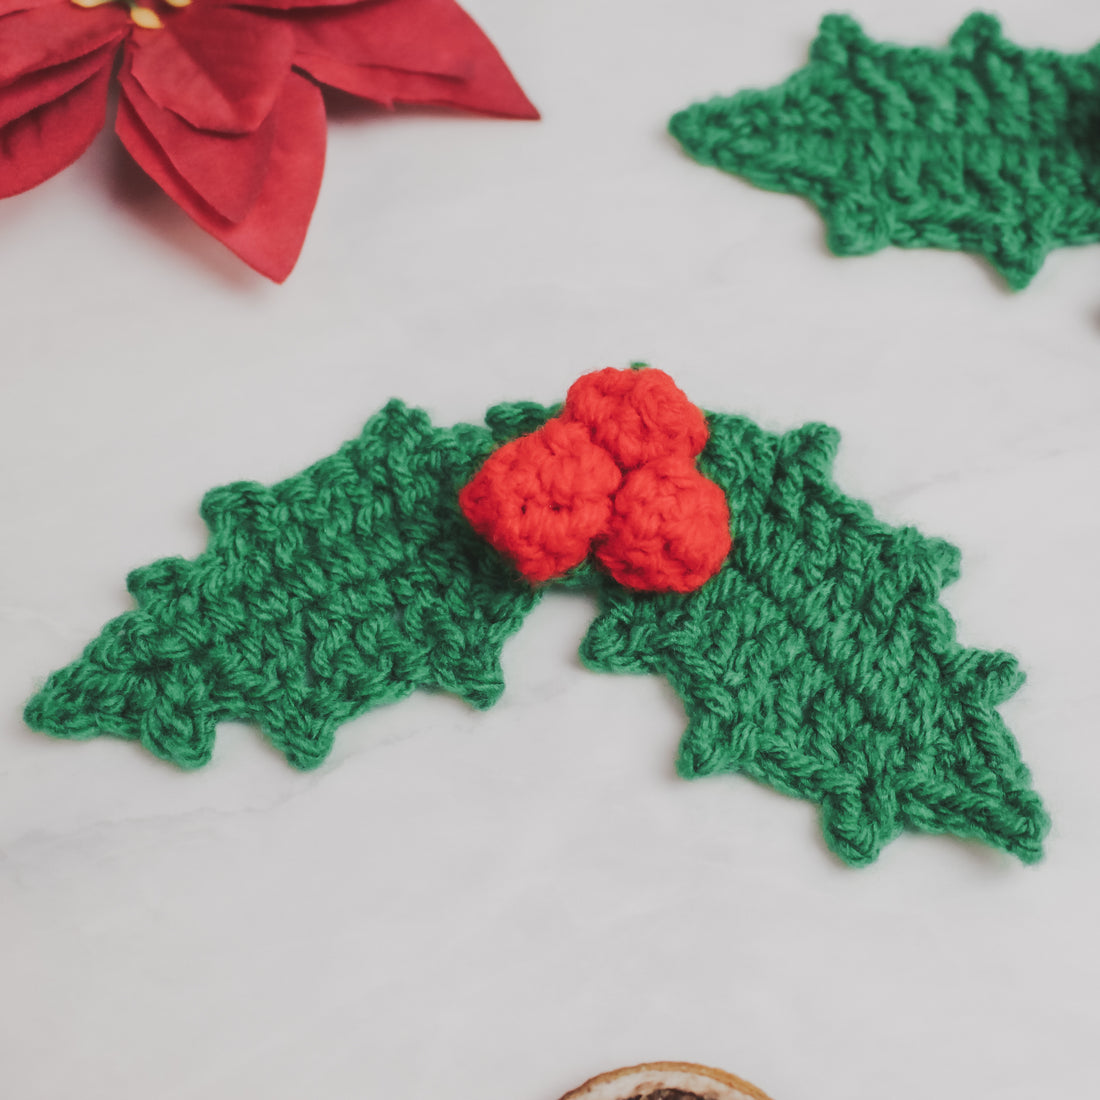 Holly plant crochet tutorial with pattern chart! Christmas Crochet With Me!